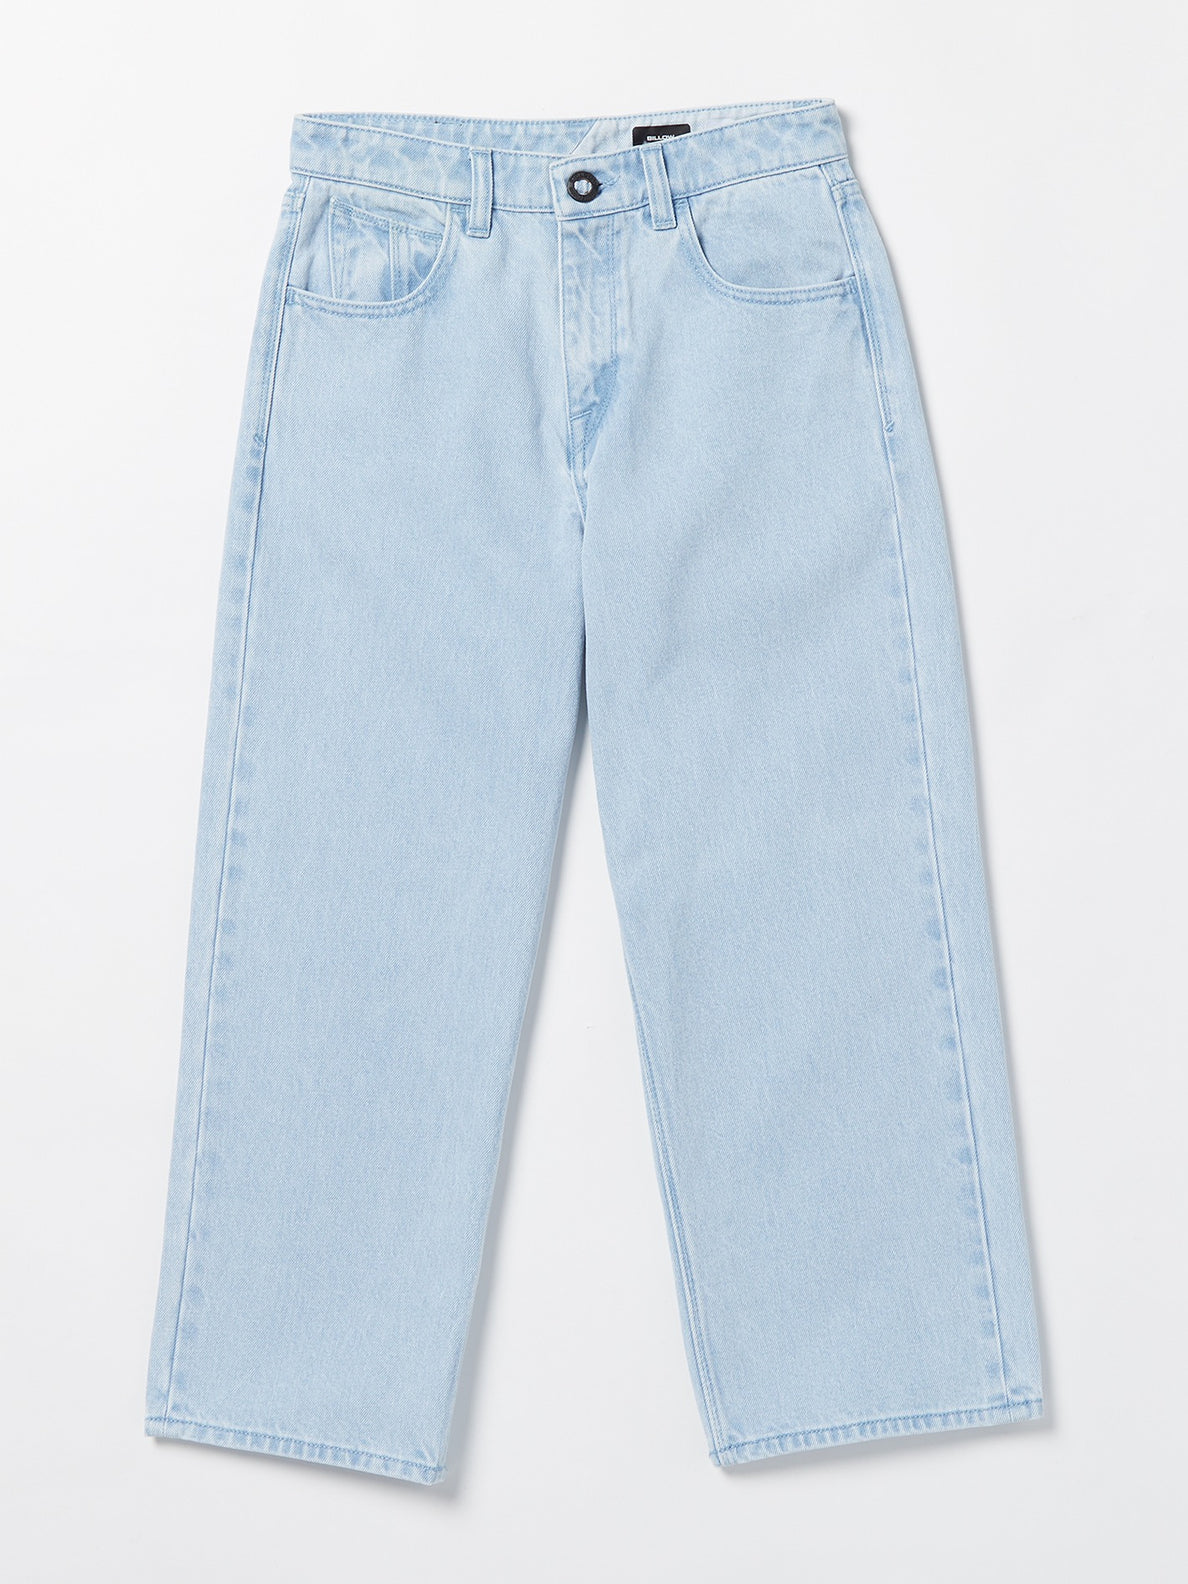 Big Youth Billow Jeans - Light Blue